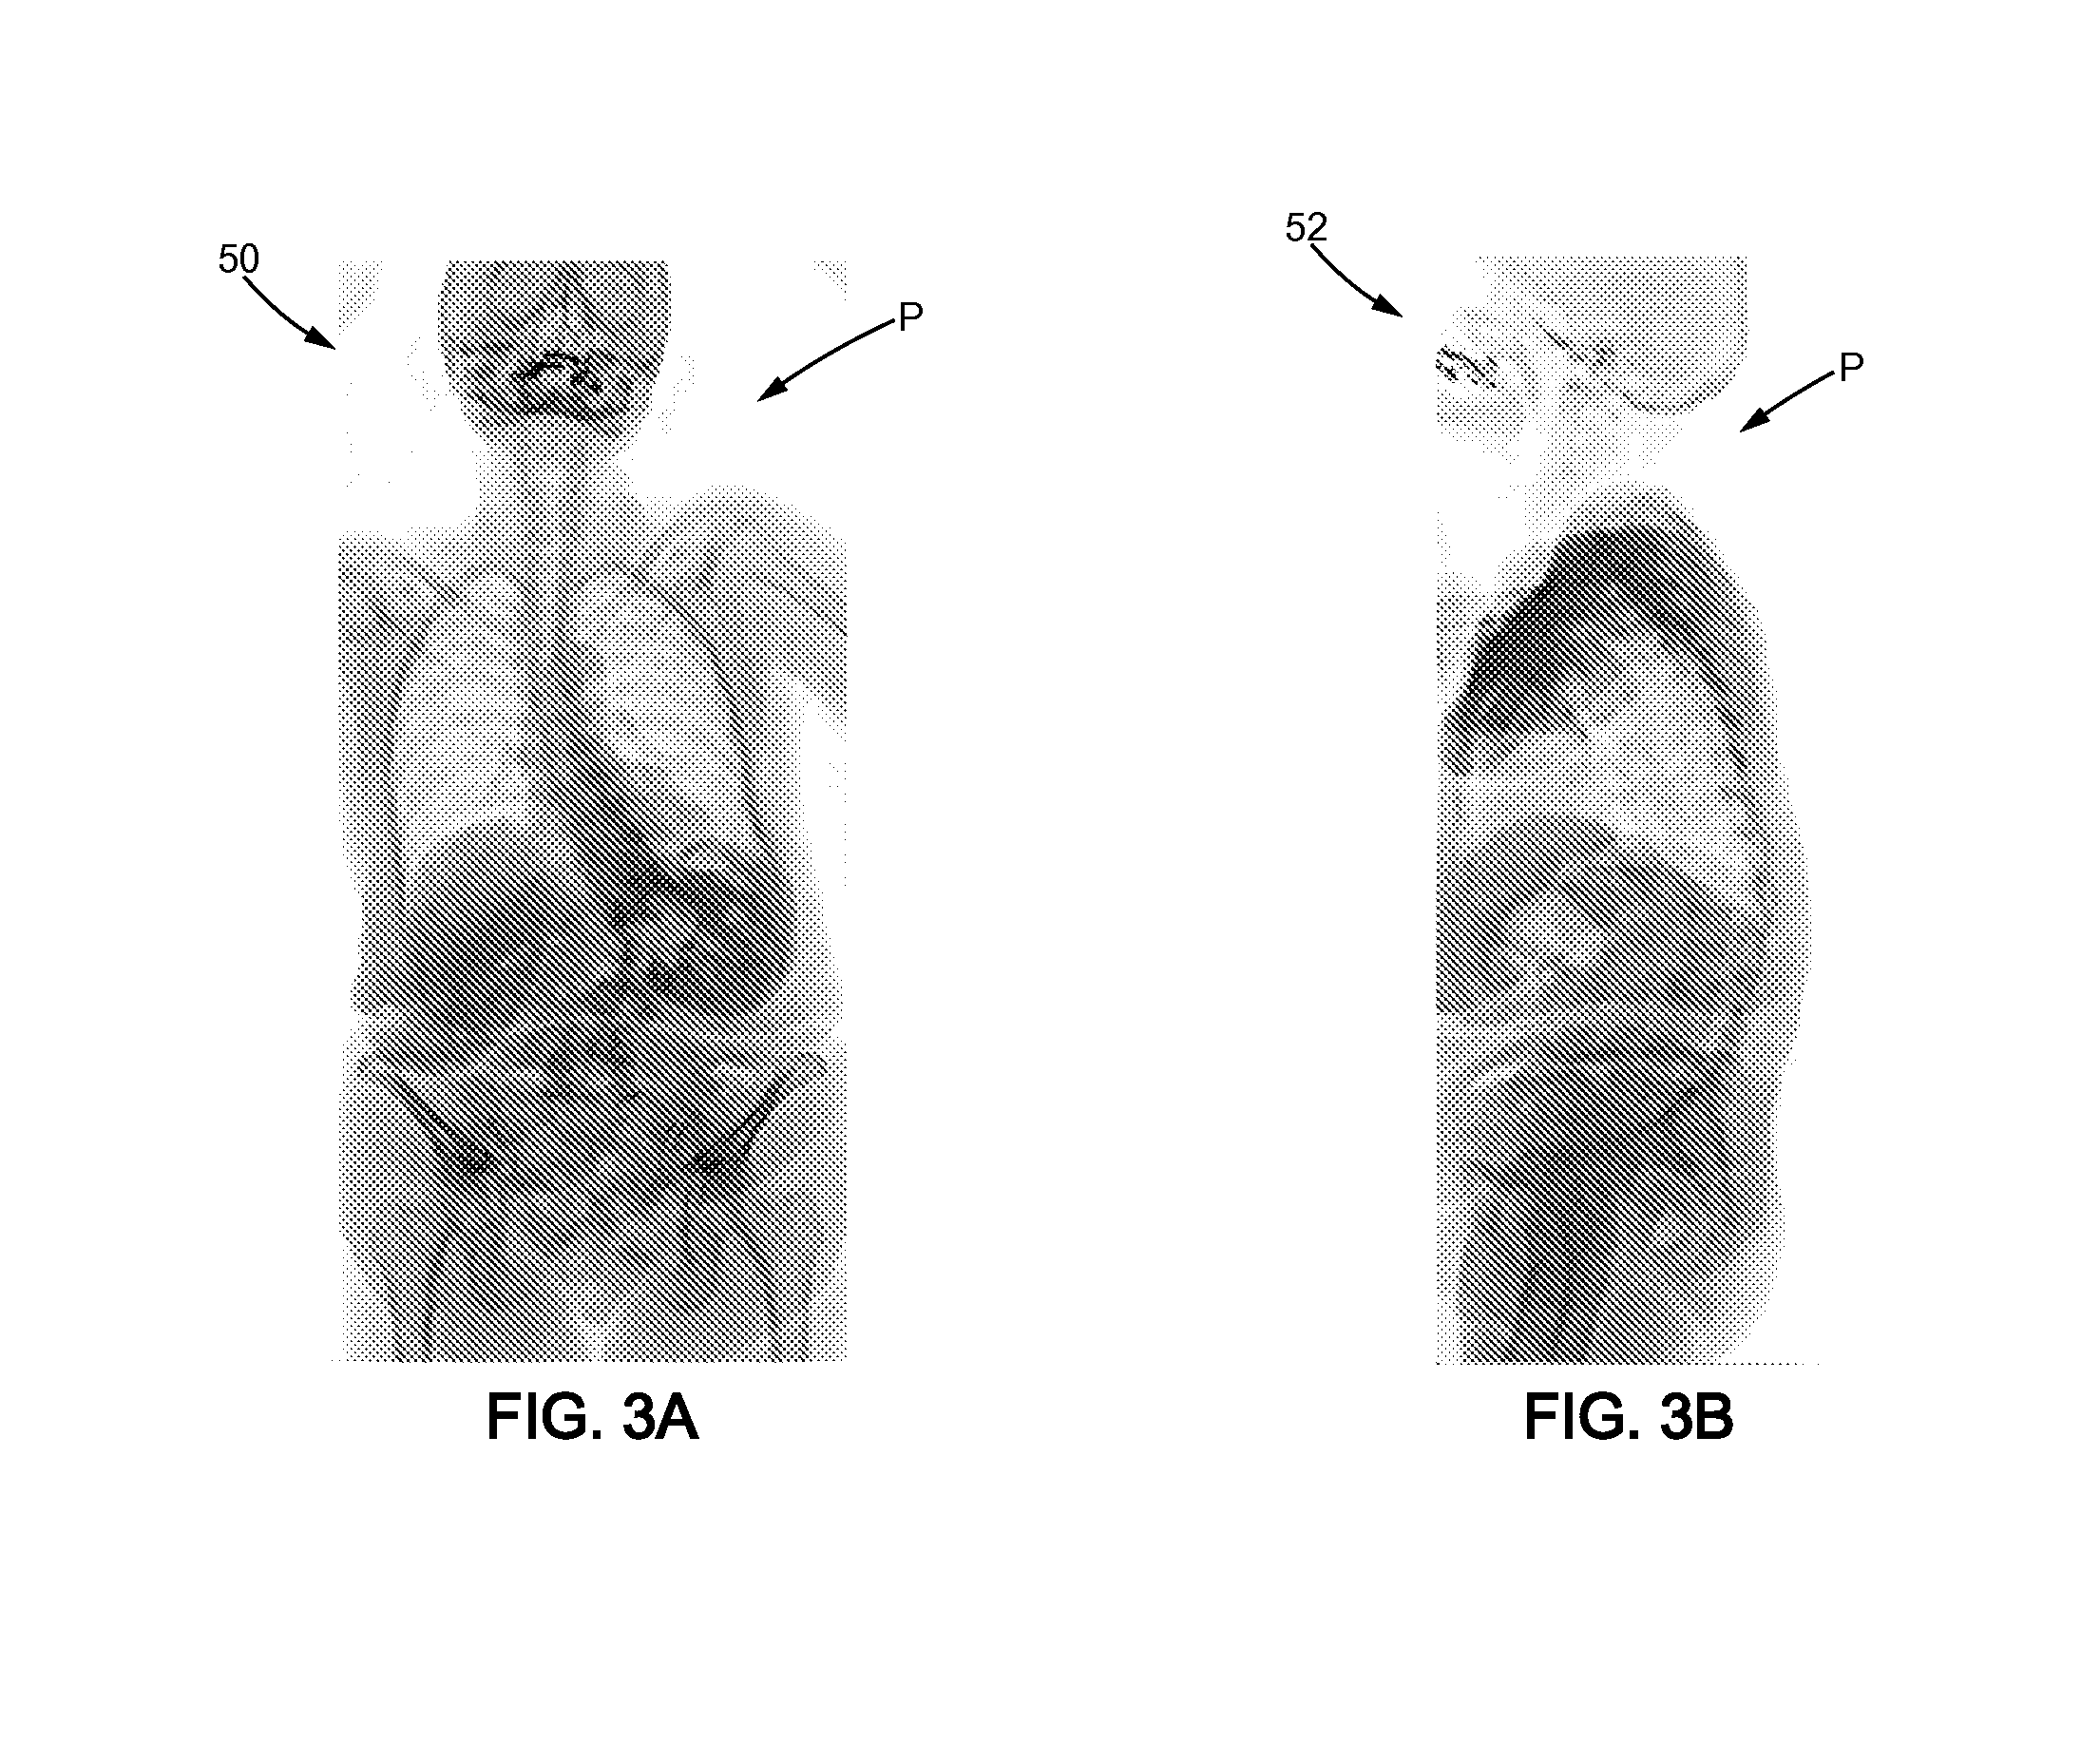 Method for designing a patient specific orthopaedic device